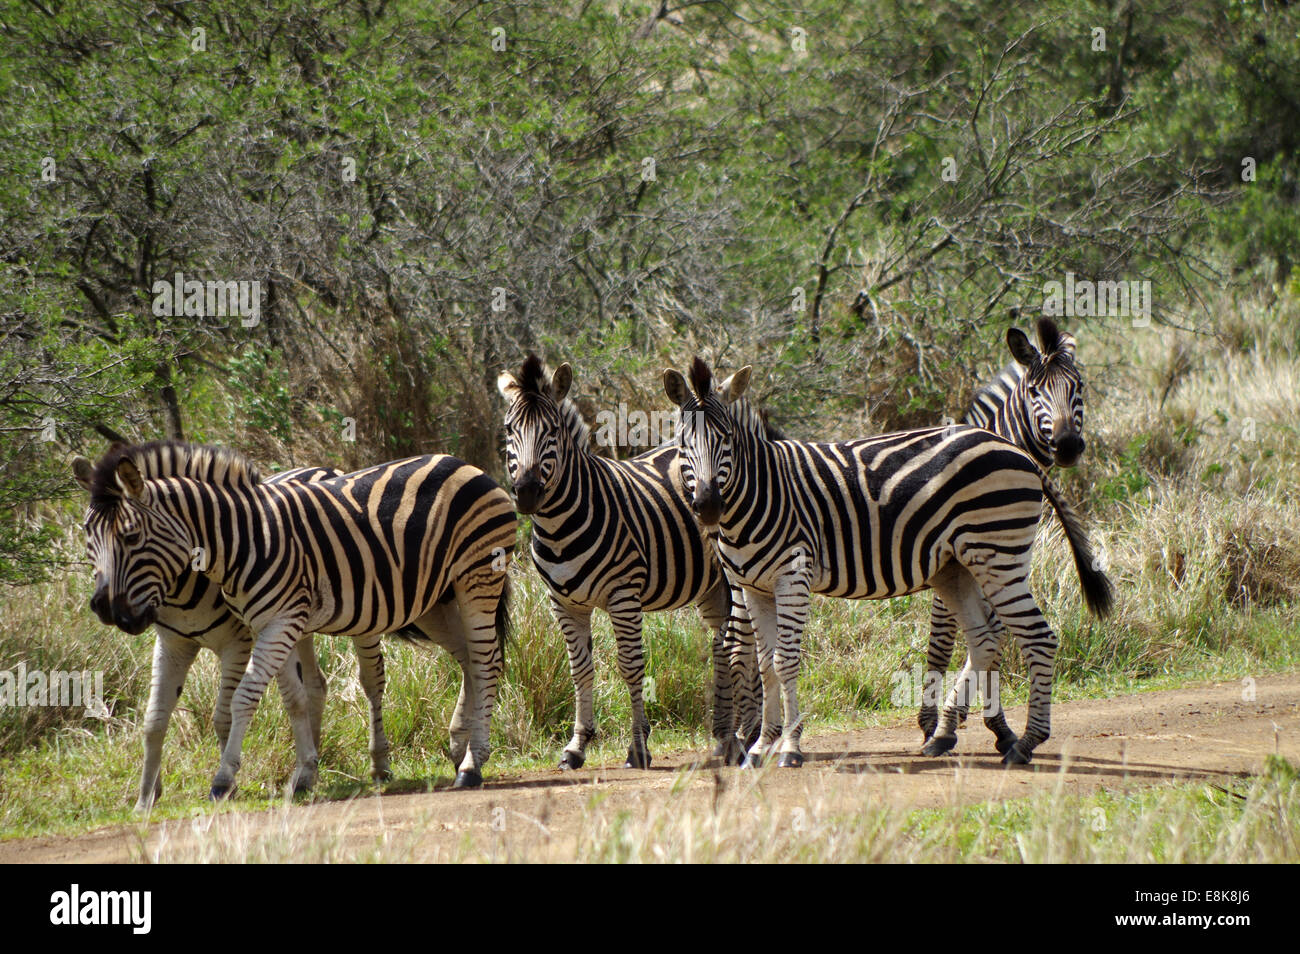 Herd of plains zebras in iSimangaliso Wetland Park, South Africa Stock Photo